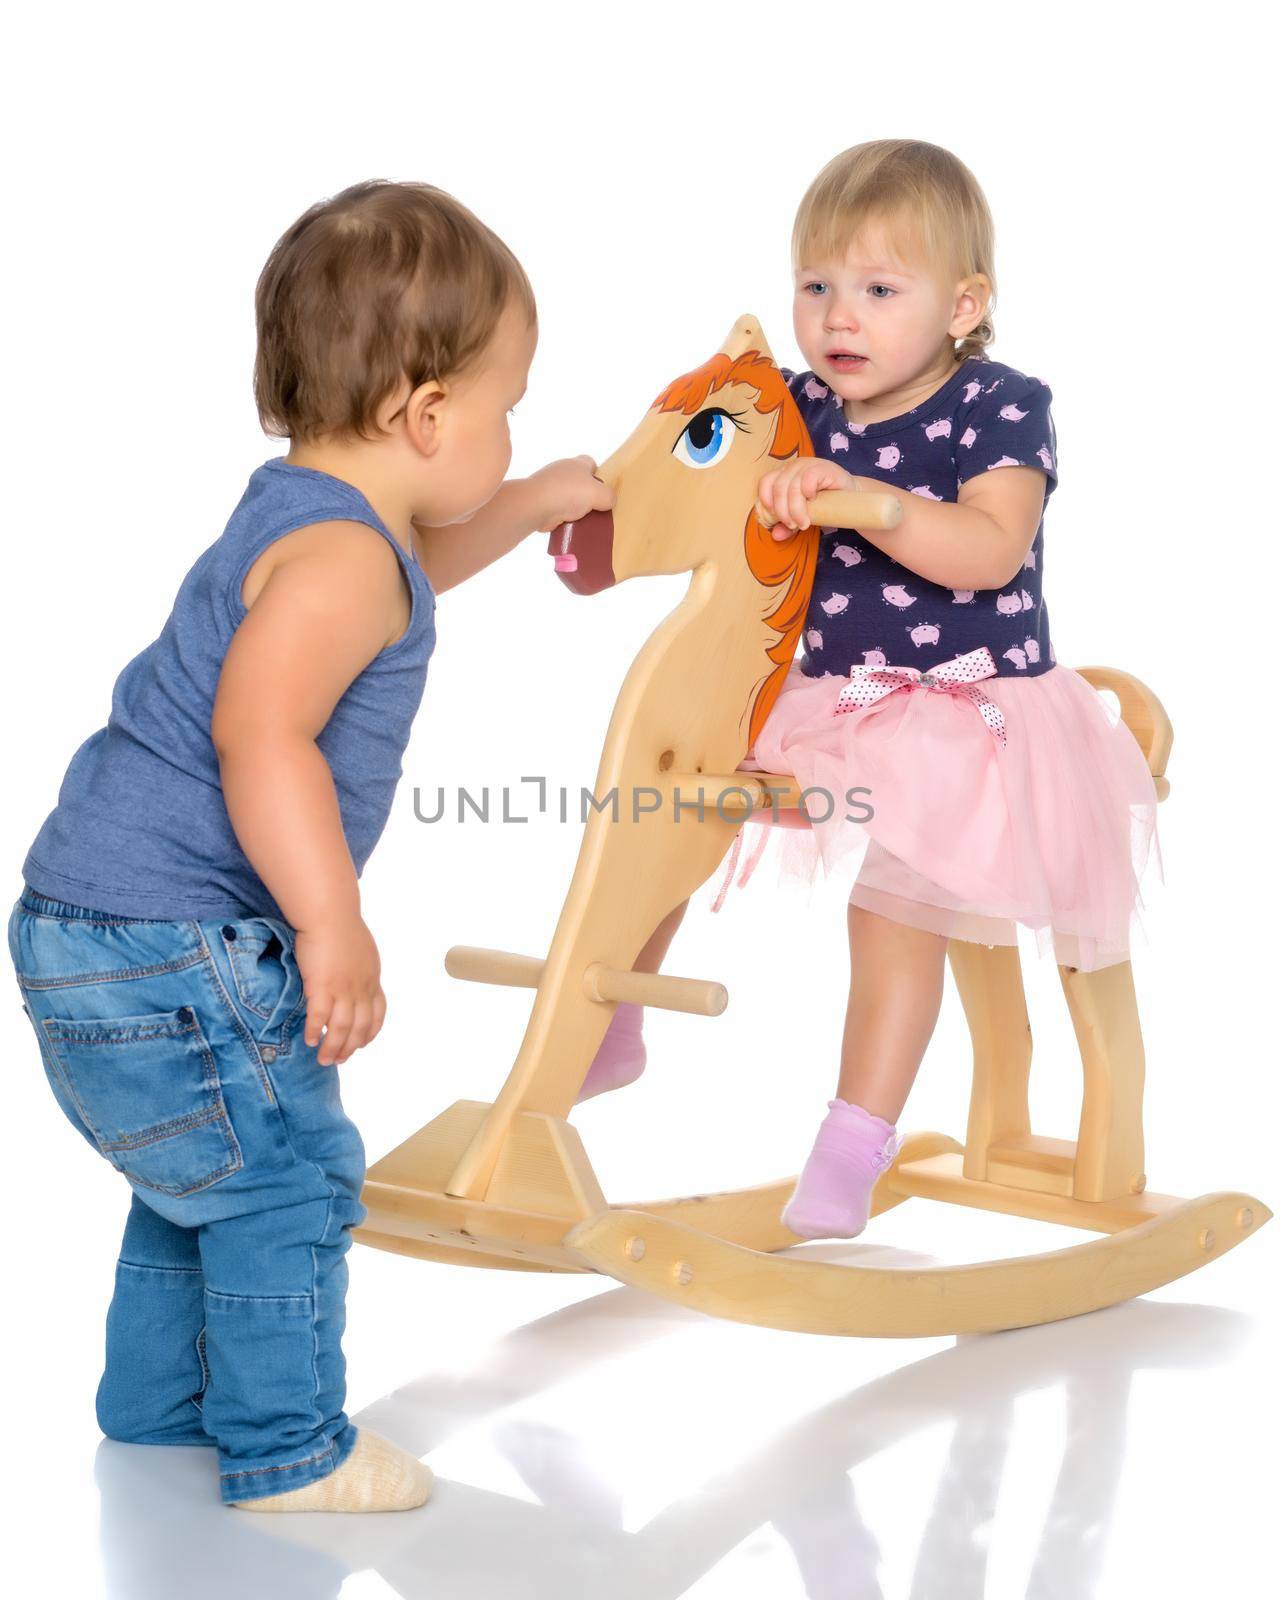 Toddler boy and girl playing with a wooden horse. by kolesnikov_studio